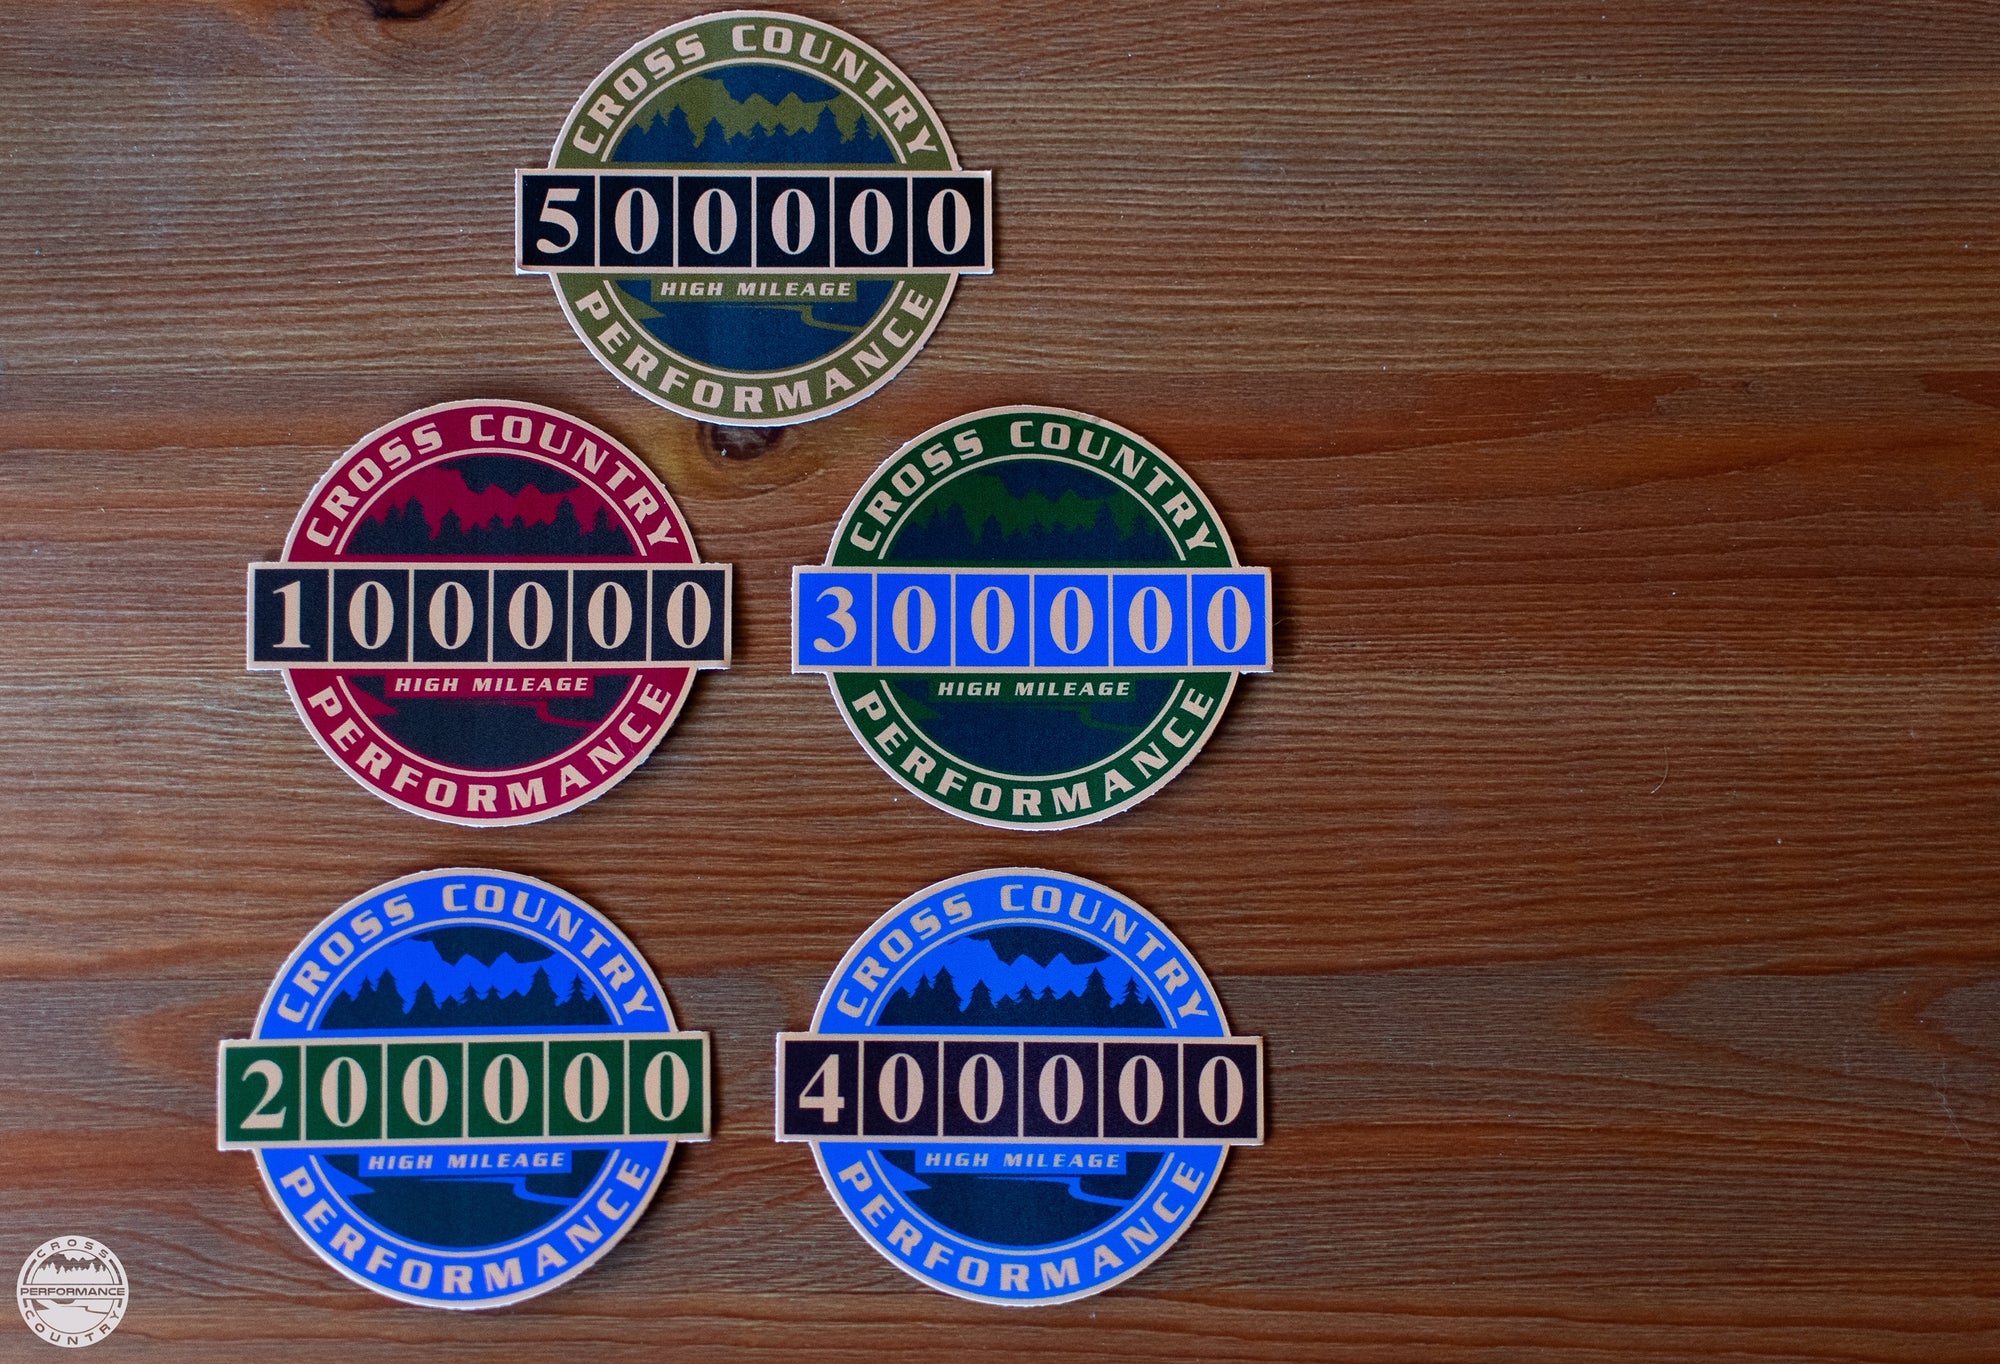 500K High Mileage Badge Sticker - Cross Country Performance